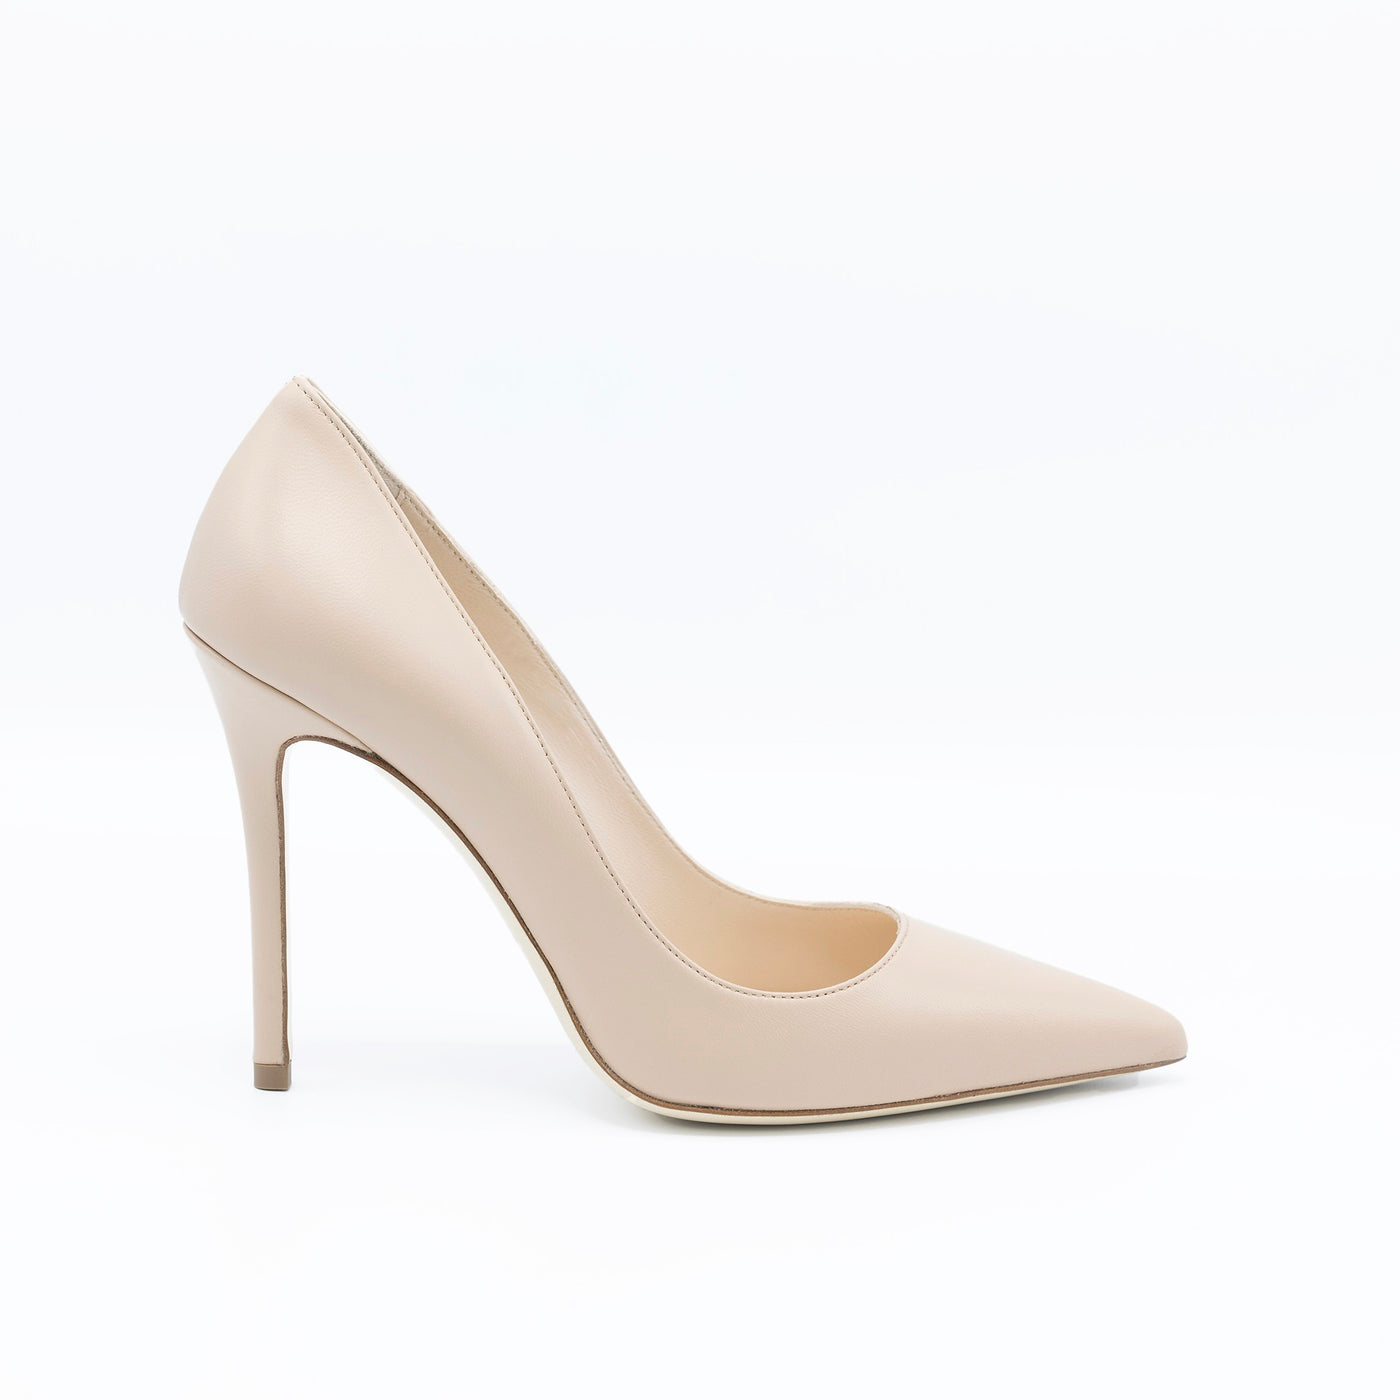 Classic pointy-toe pumps with high heel in nude